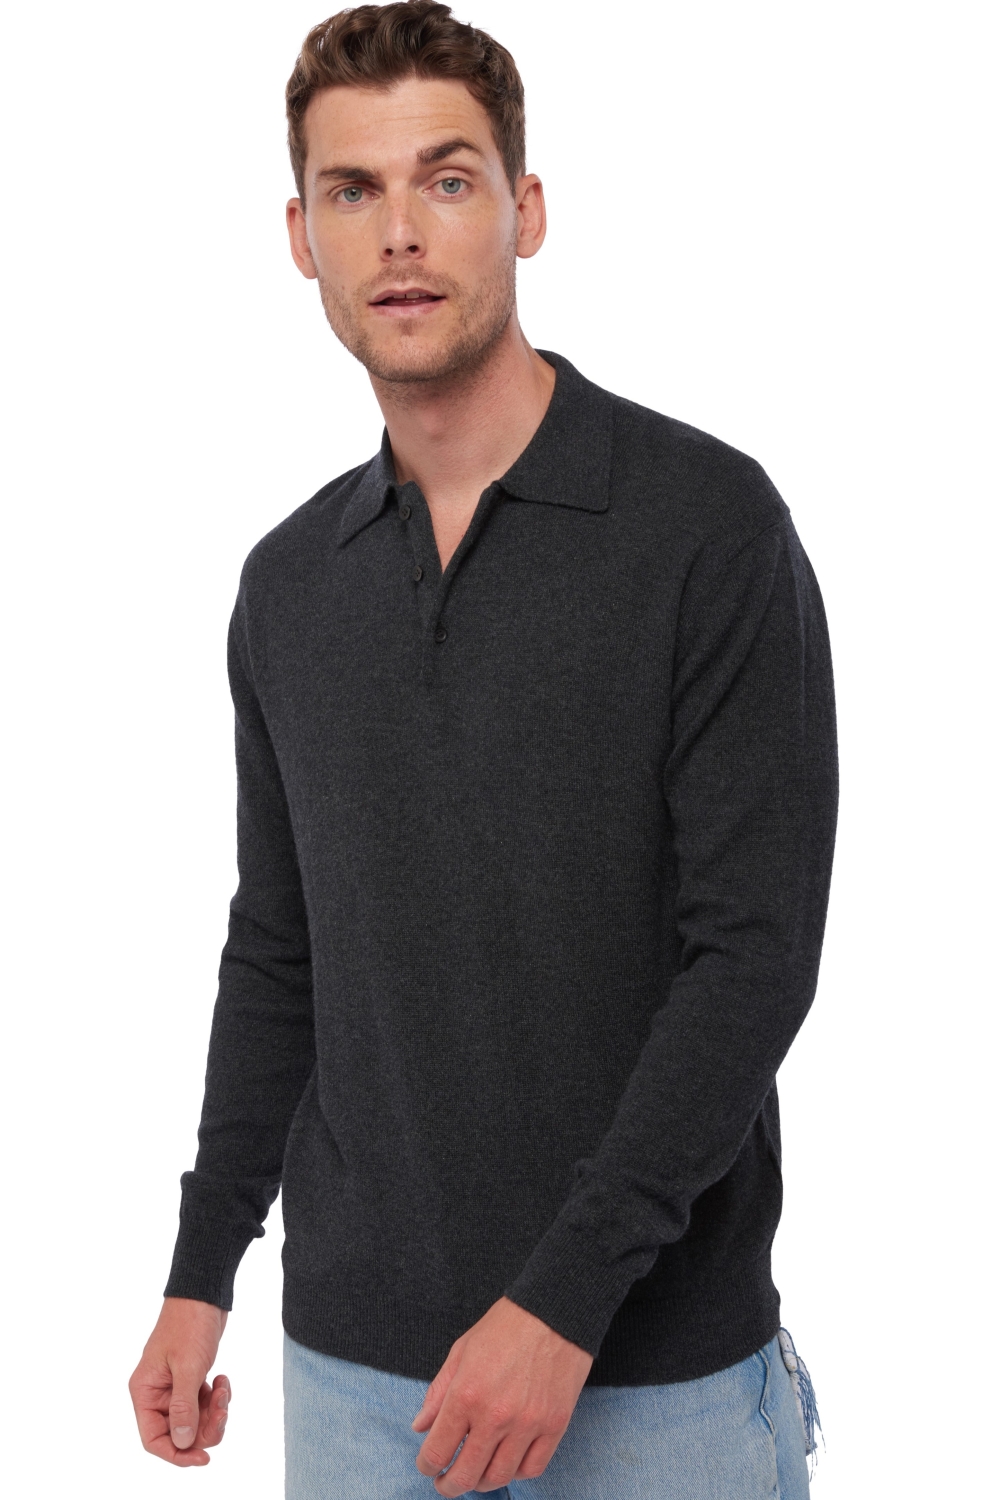 Cachemire pull homme alexandre anthracite chine xl